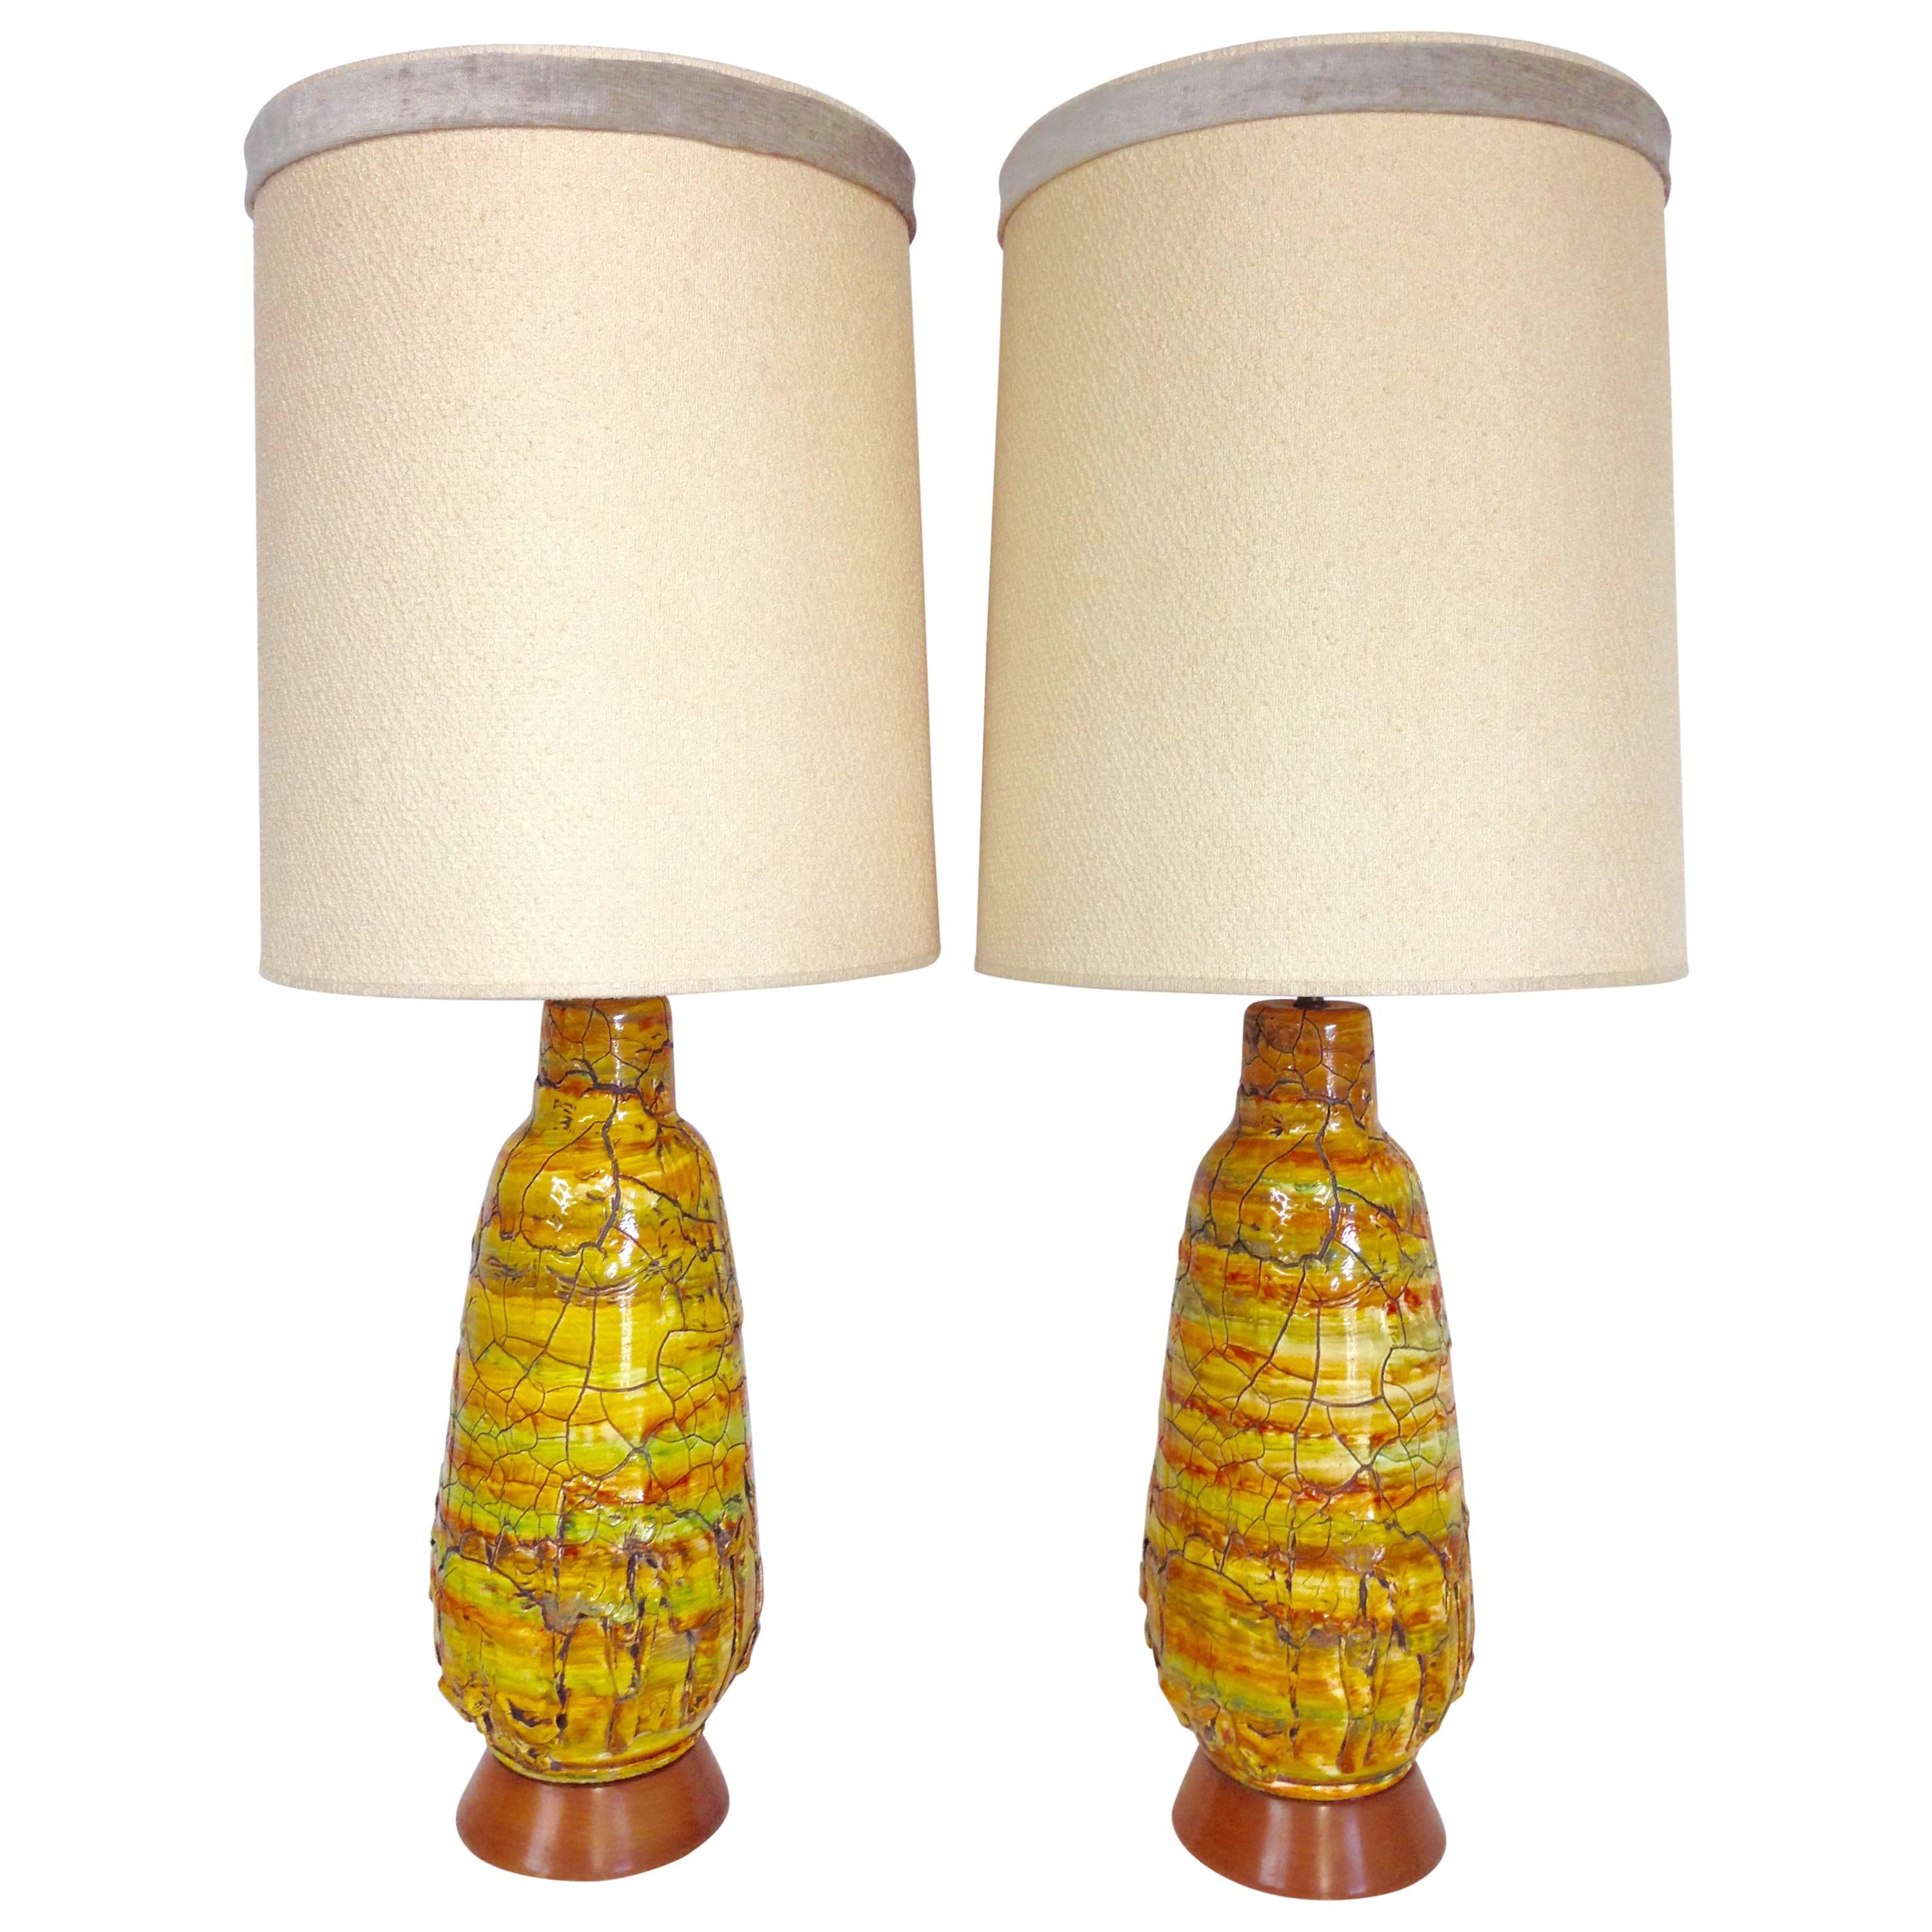 Mid-Century Modern Pair Of Monumental Chalkware Glaze "Lava" Lamps By, F.A.I.P.  For Sale